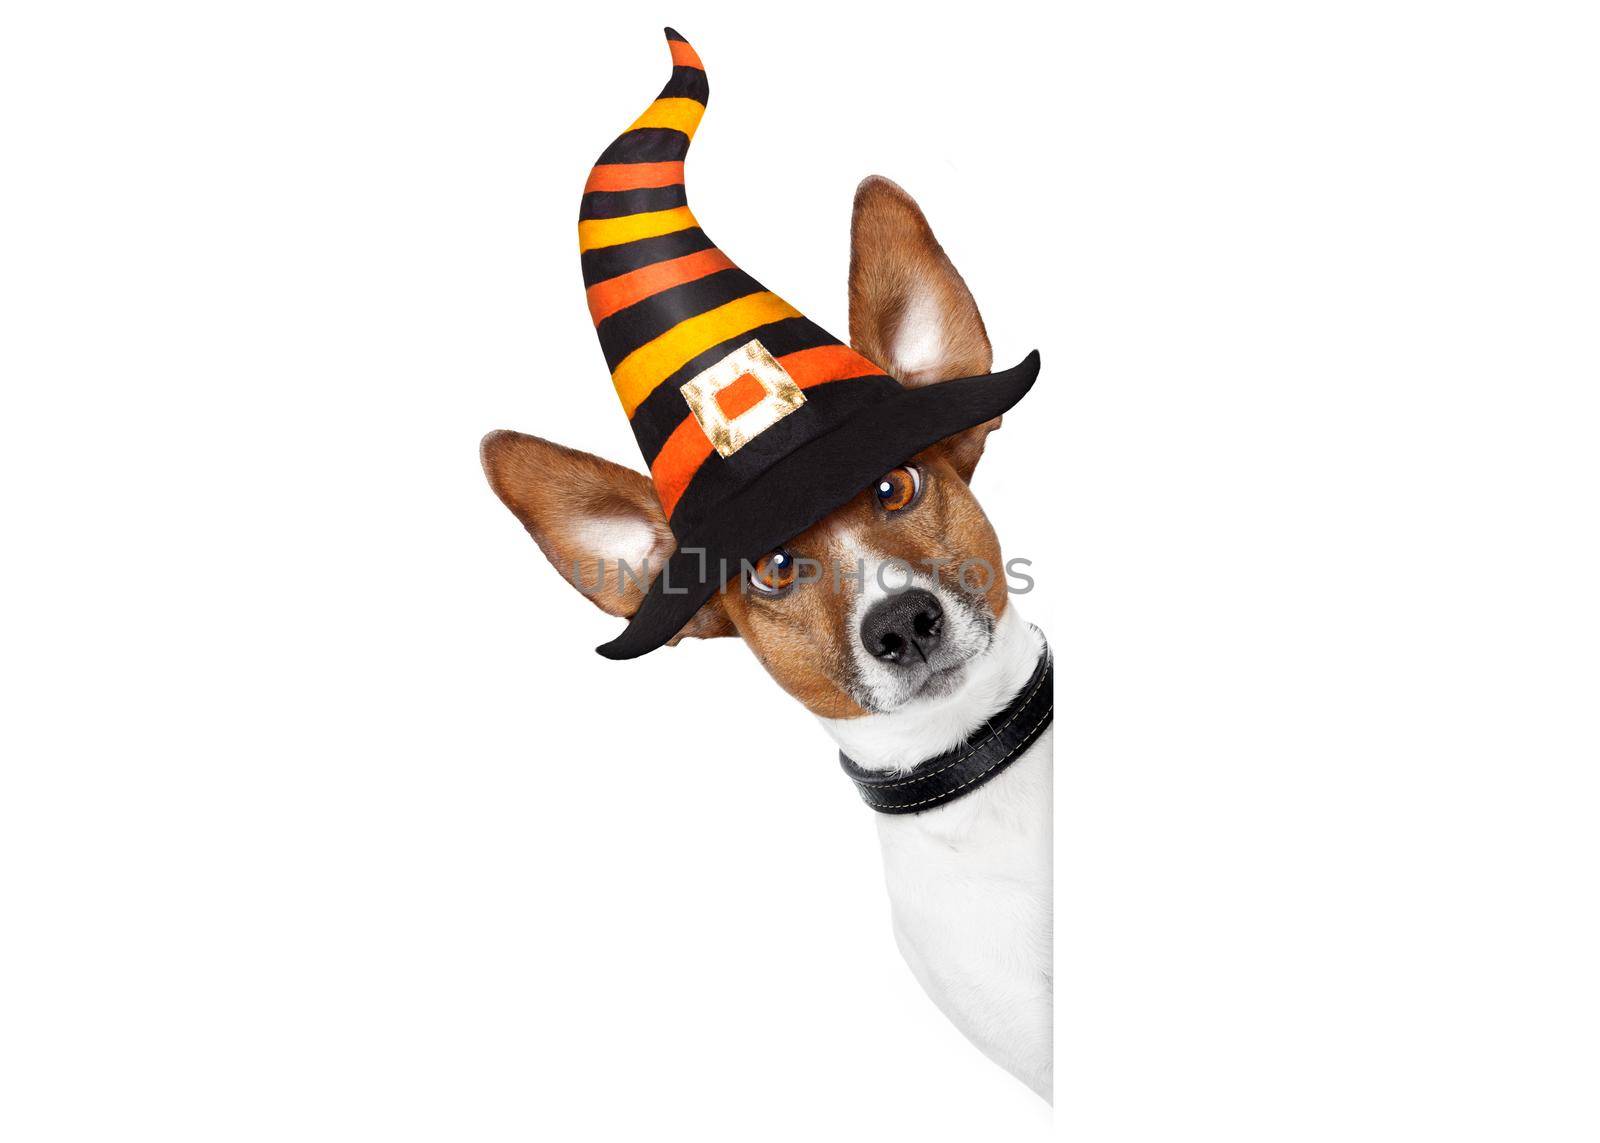 halloween devil jack russell dog  scared and frightened, behind  a blank empty banner or placard , isolated on white background, wearing a witch hat